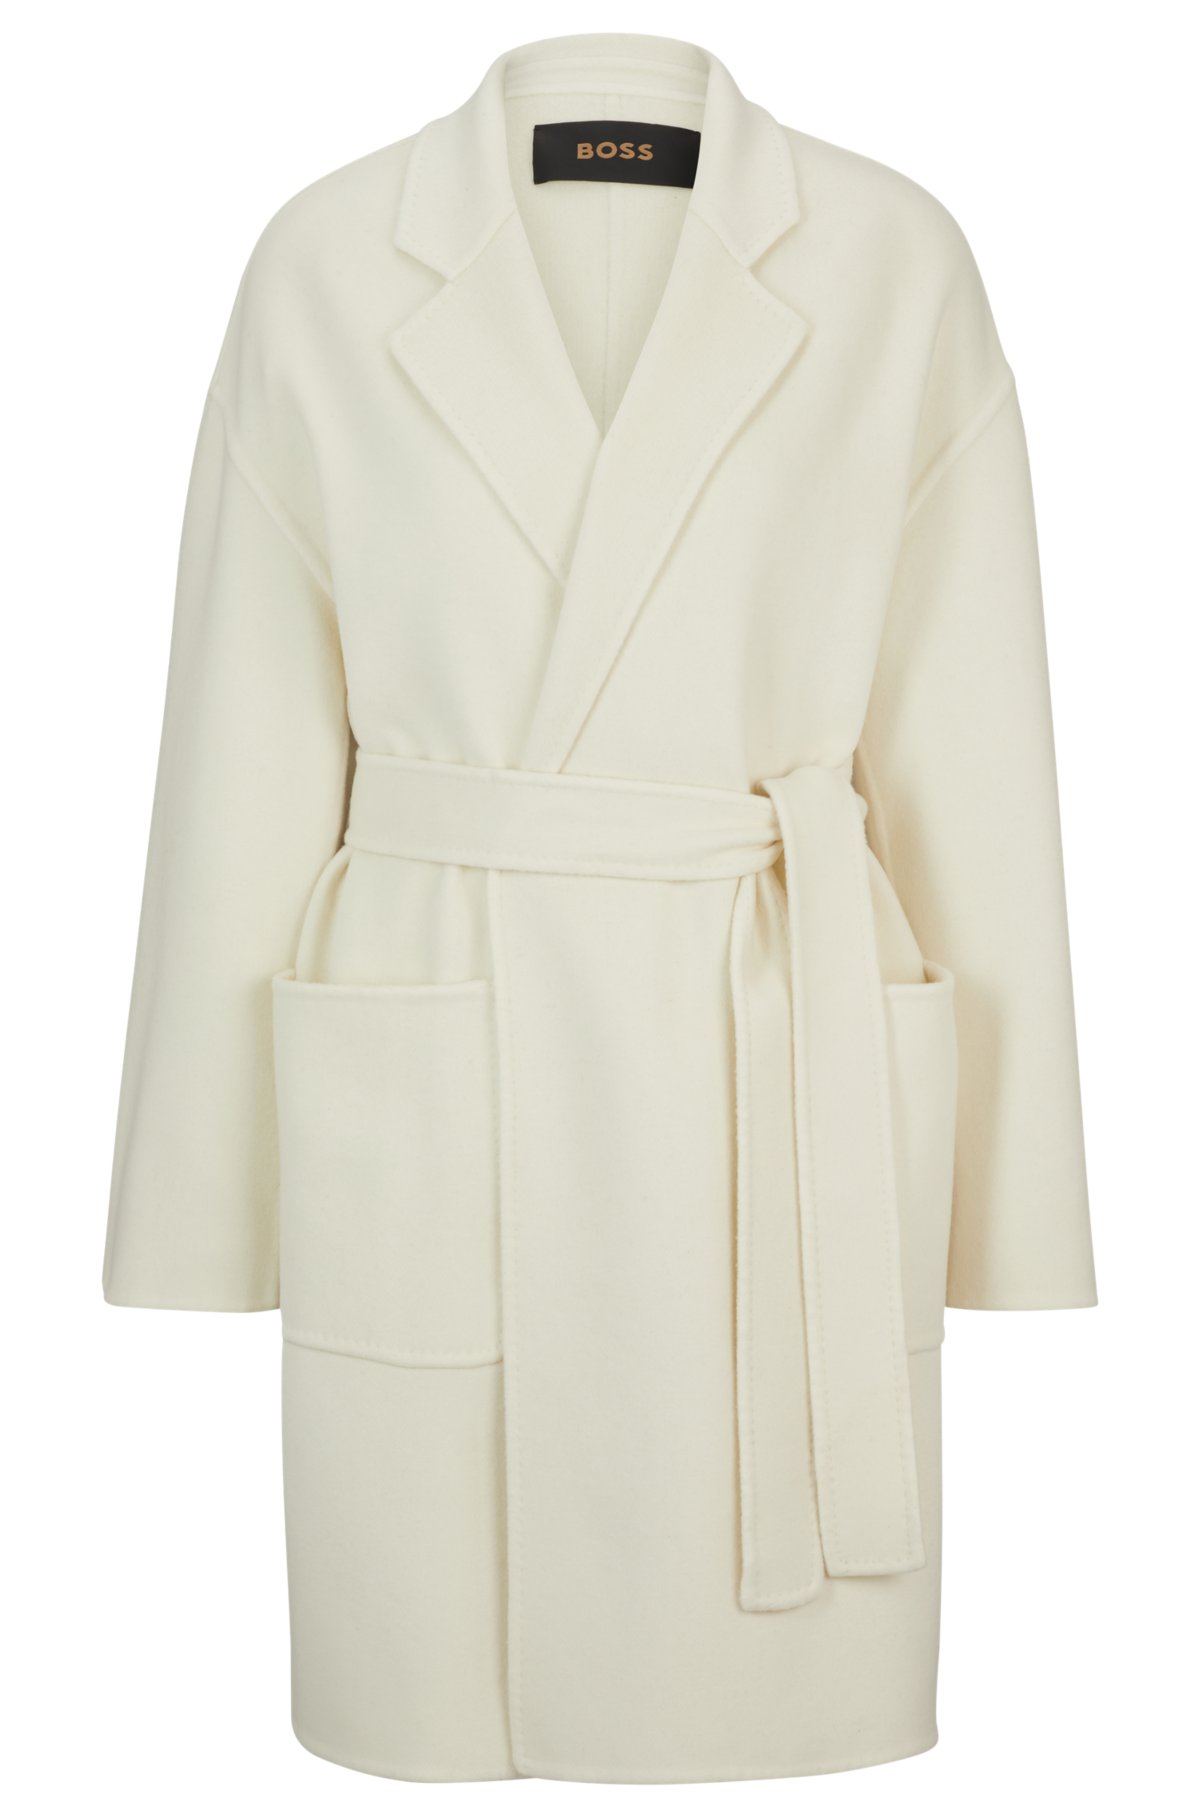 BOSS - Belted coat in virgin wool and cashmere